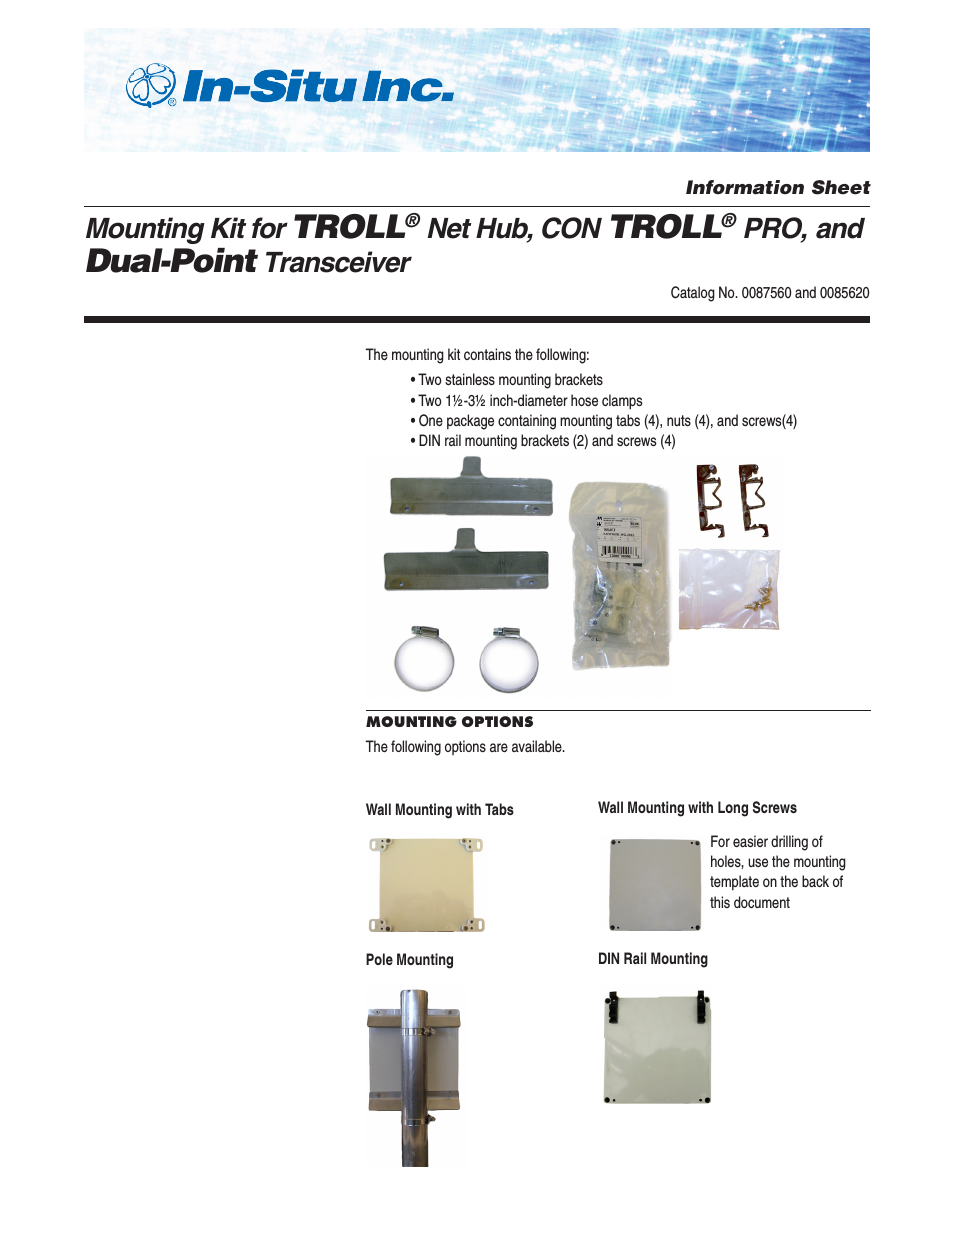 Con TROLL PRO System Mounting Kit and Template